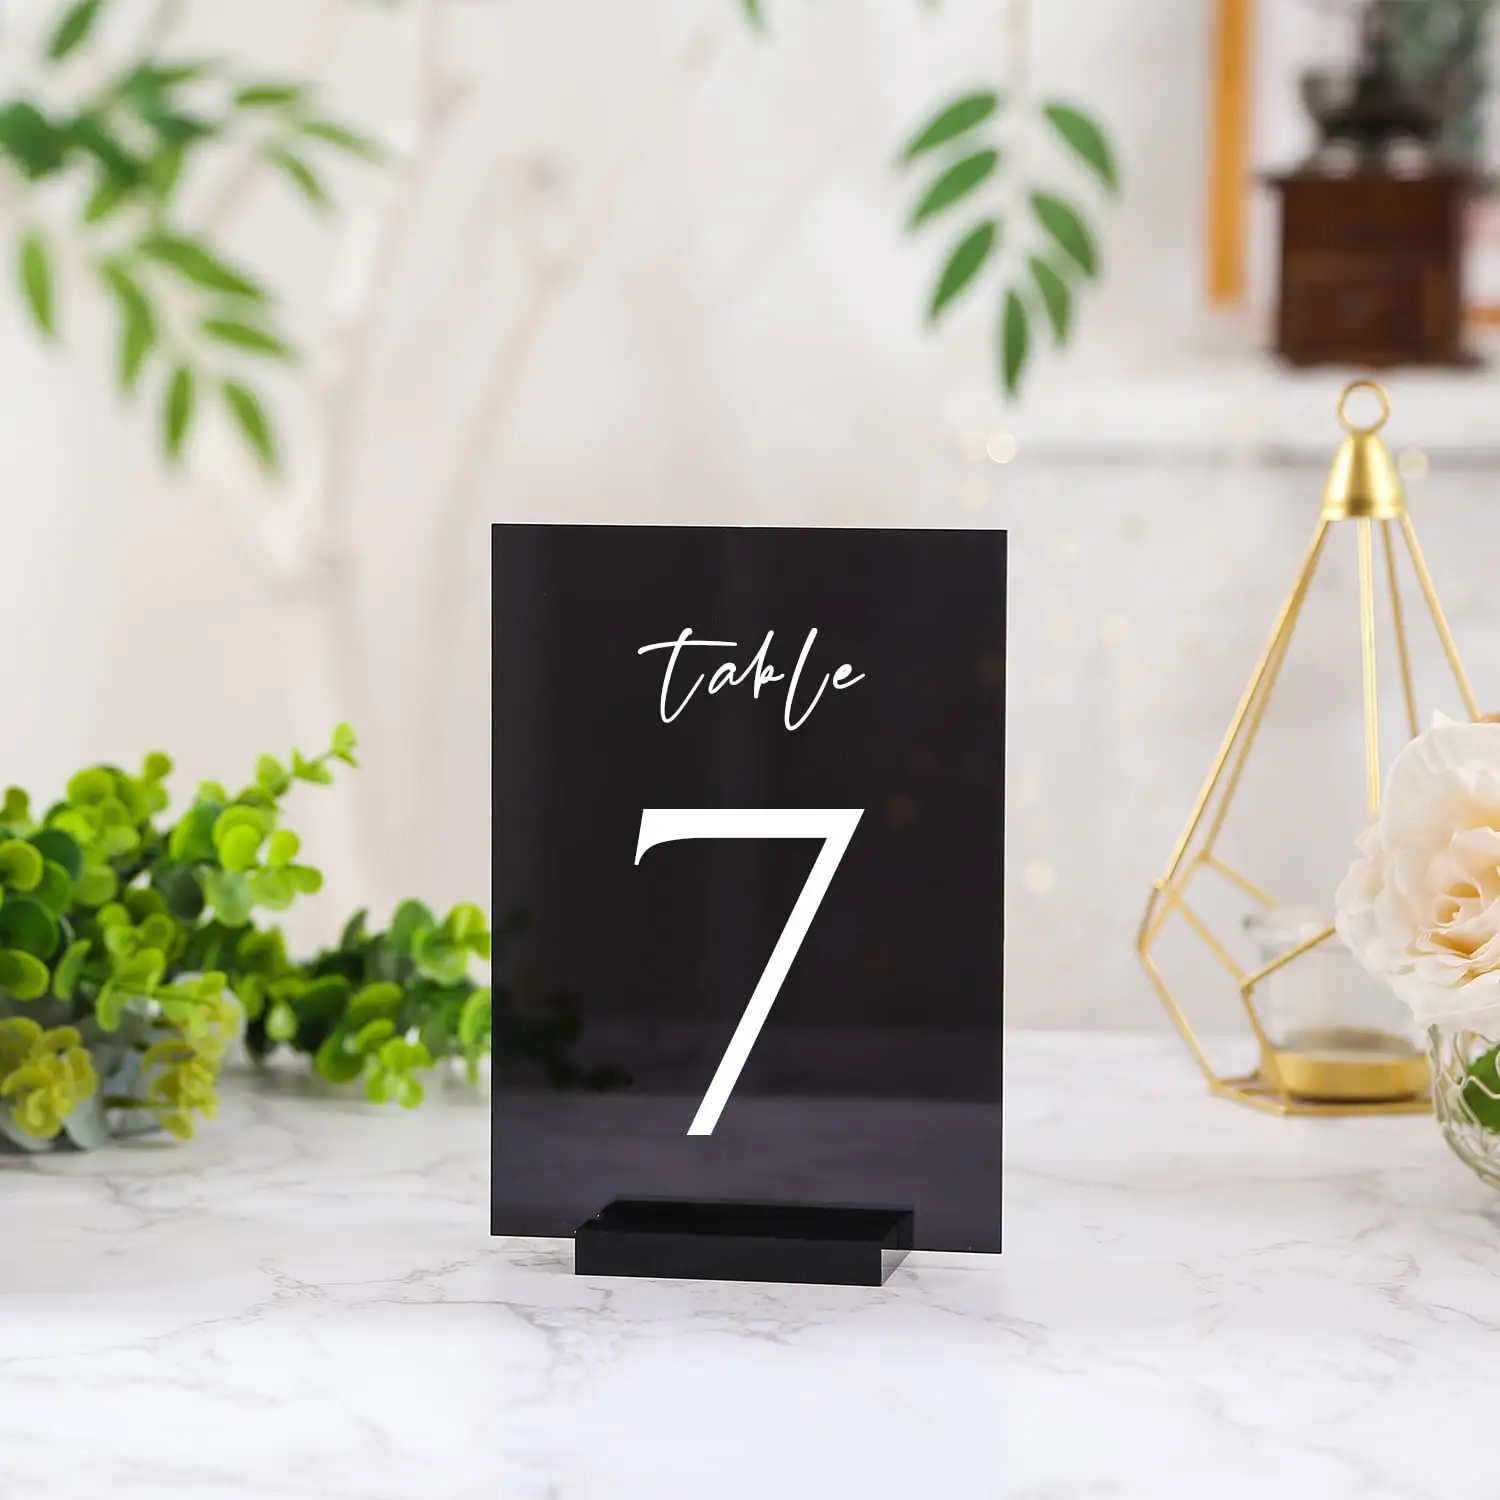 20 Pack Black Acrylic Sign Acrylic Wedding Table Numbers, 5 x 7 inch, DIY Acrylic Sheet for for Wedding Table Number Holder, Ta